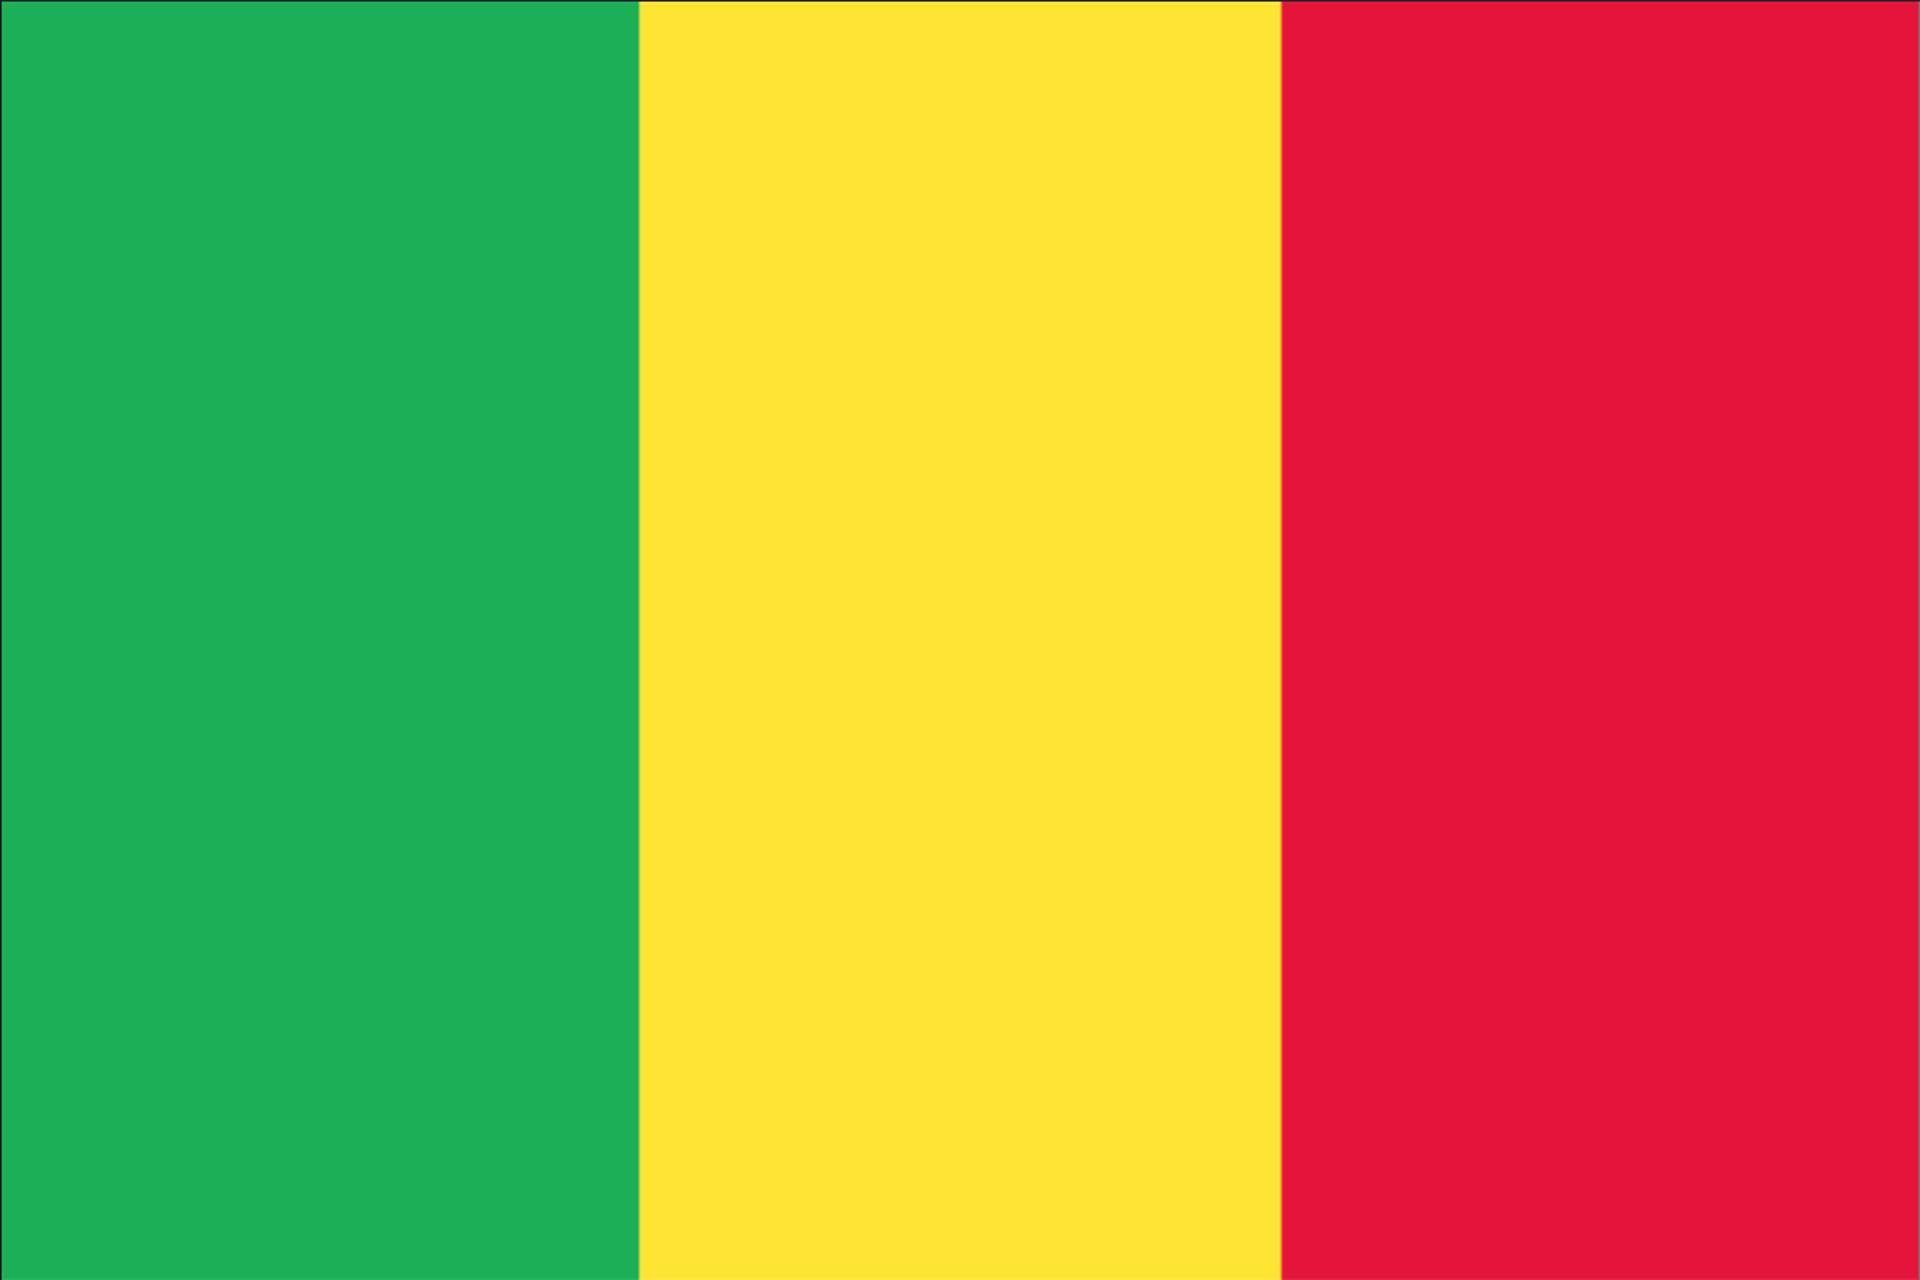 Mali 160 flaggenmeer Flagge Querformat g/m²